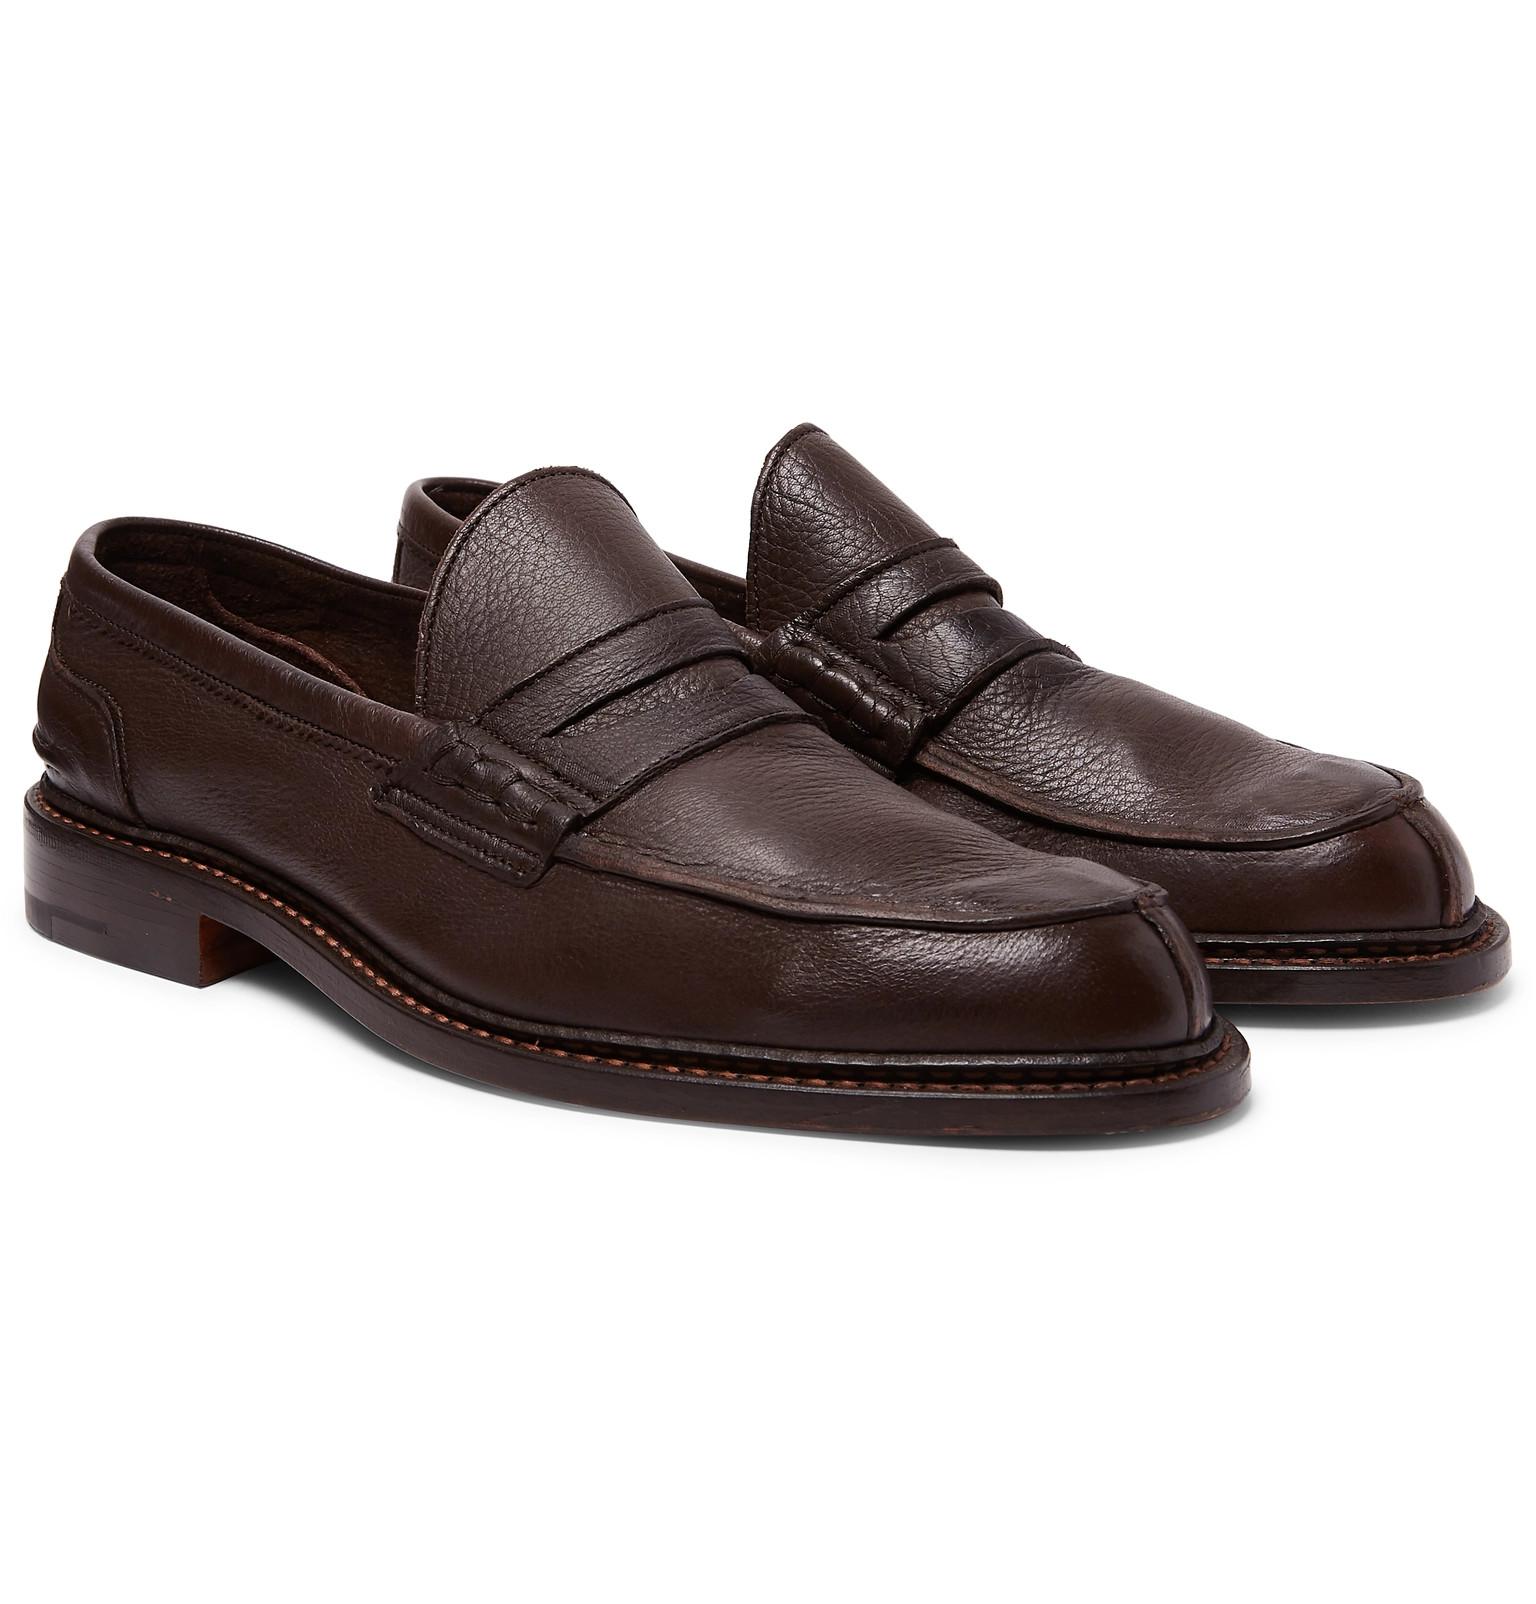 Tricker's Adam Pebble-grain Leather Penny Loafers in Brown for Men - Lyst